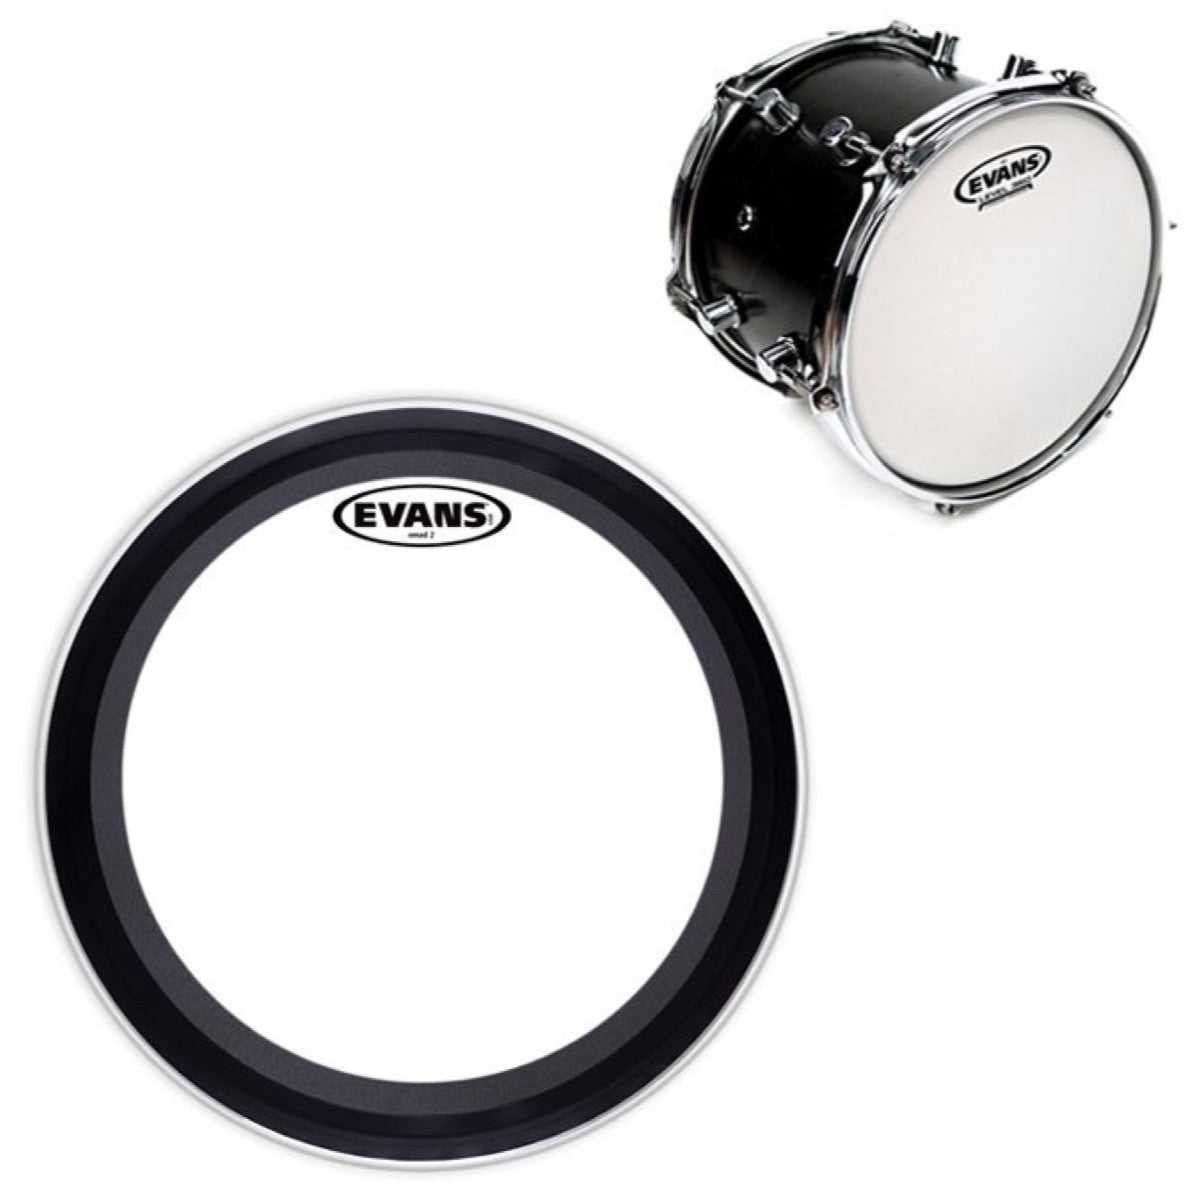 Evans EMAD Heavyweight Clear Bass Drumhead, with Evans G1 Coated Drum Head, 14 Inch, 22 Inch